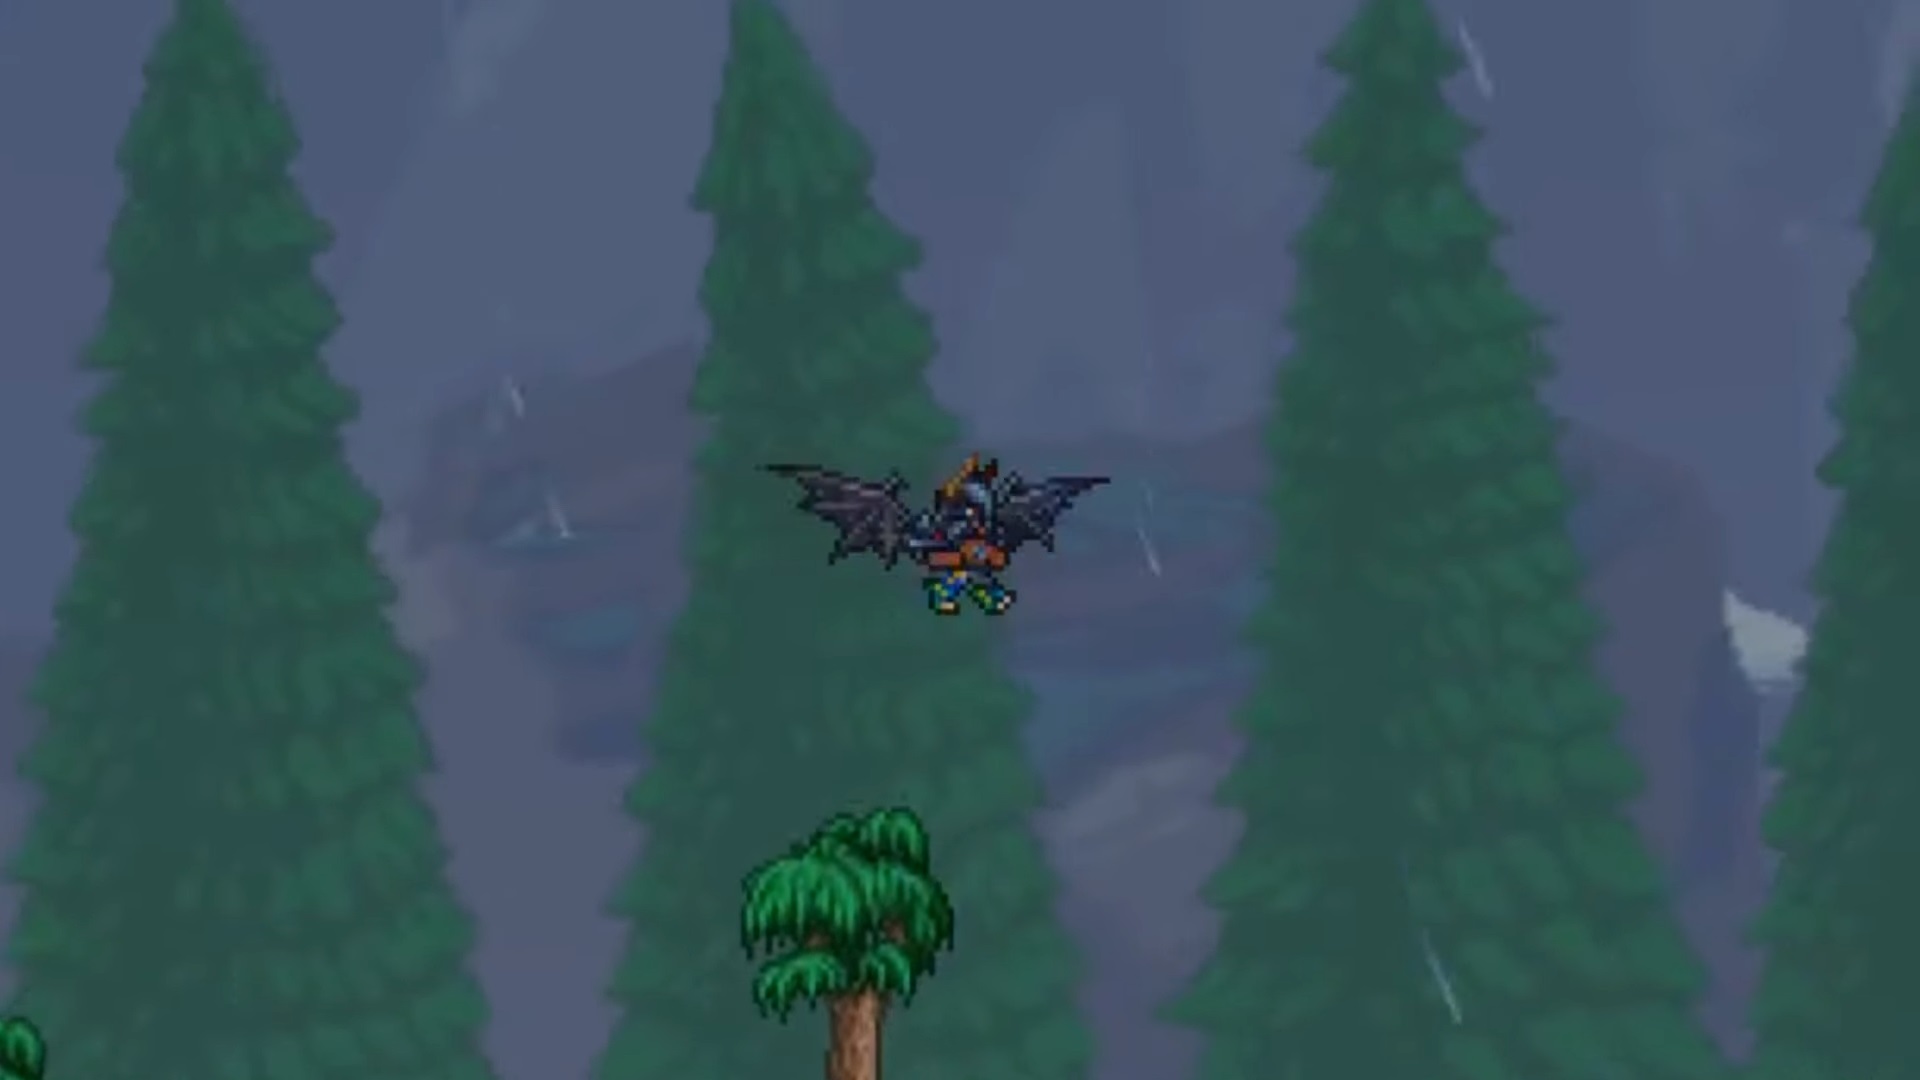 The FoodBarbarian's Tattered Dragon Terraria wings in action